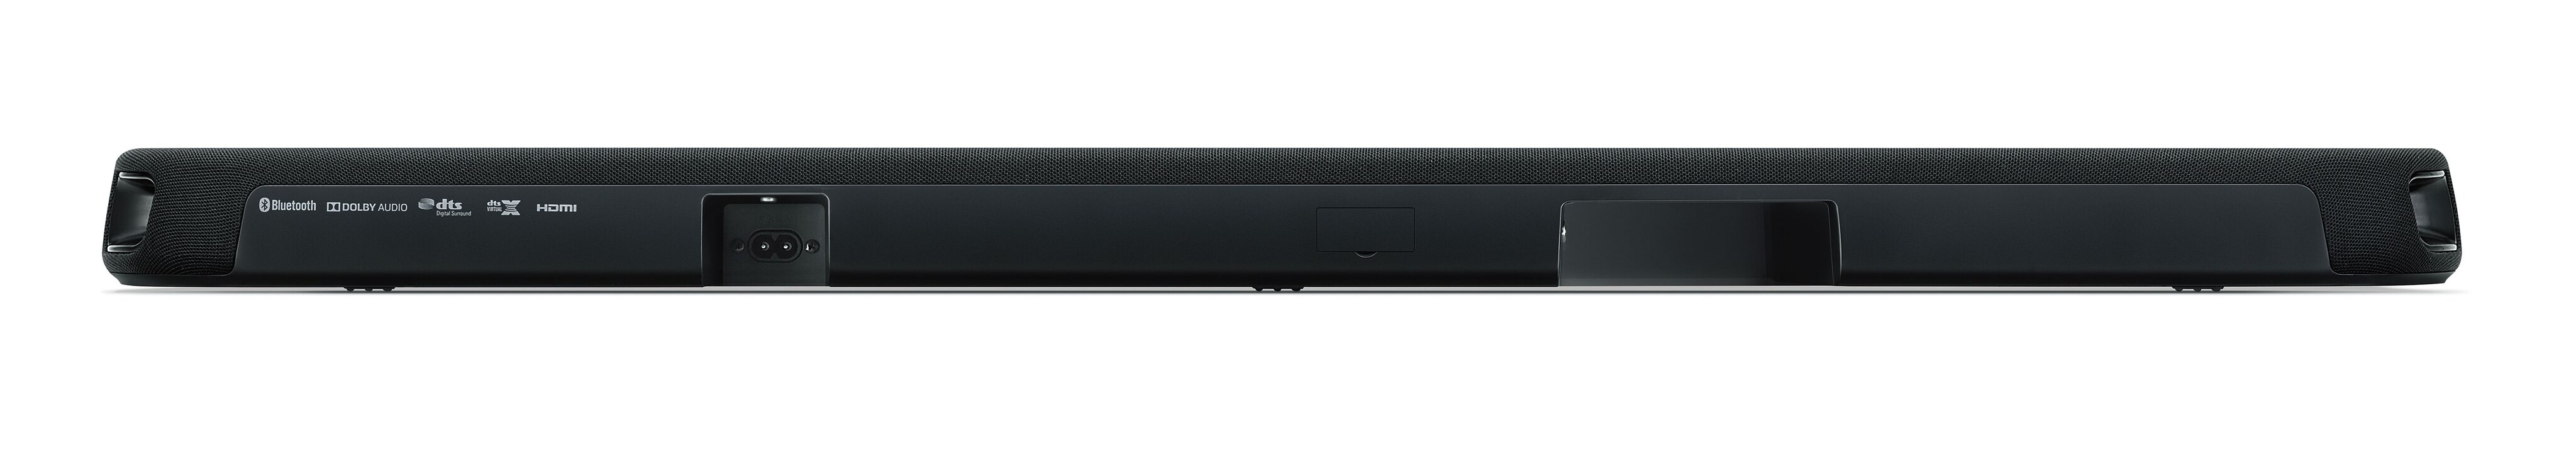 YAS-108 - Overview - Sound Bars - Audio & Visual - Products